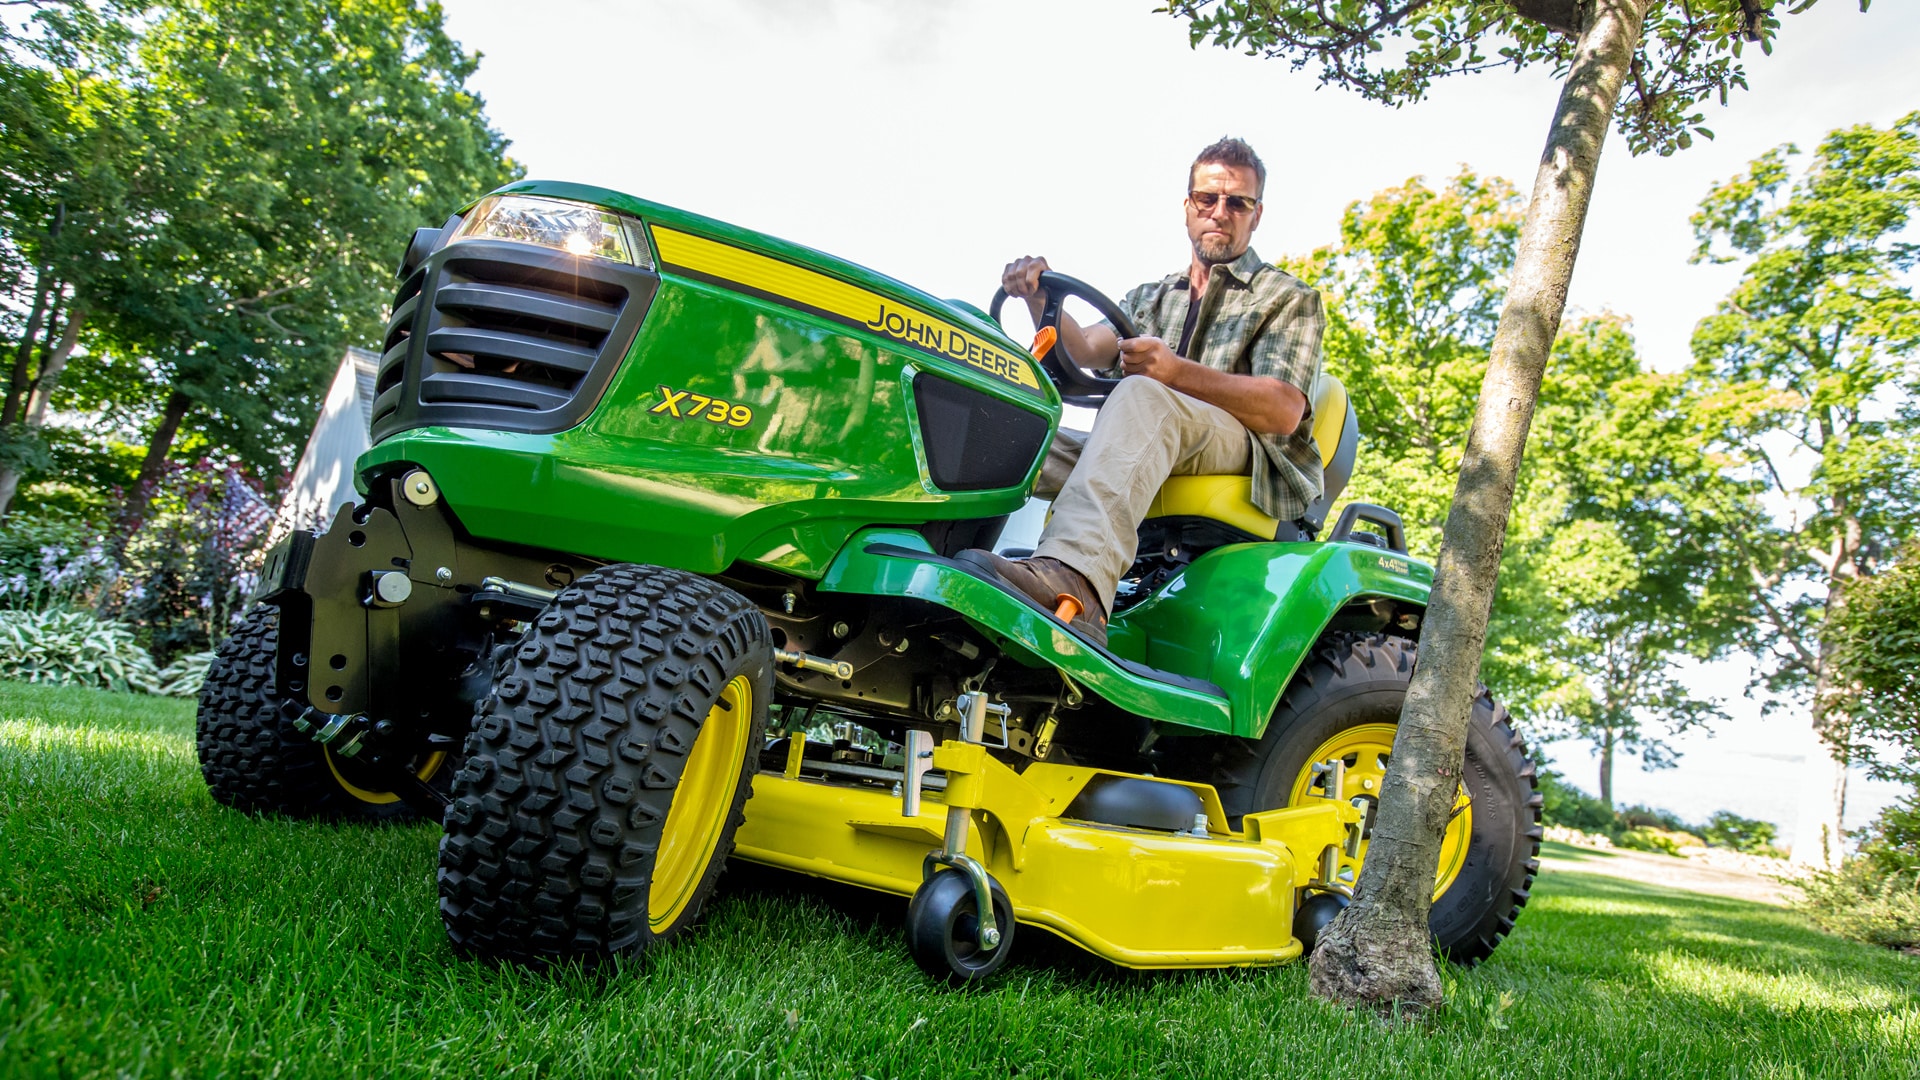 dramatic angle view of the ultimate ride on mower on lawn